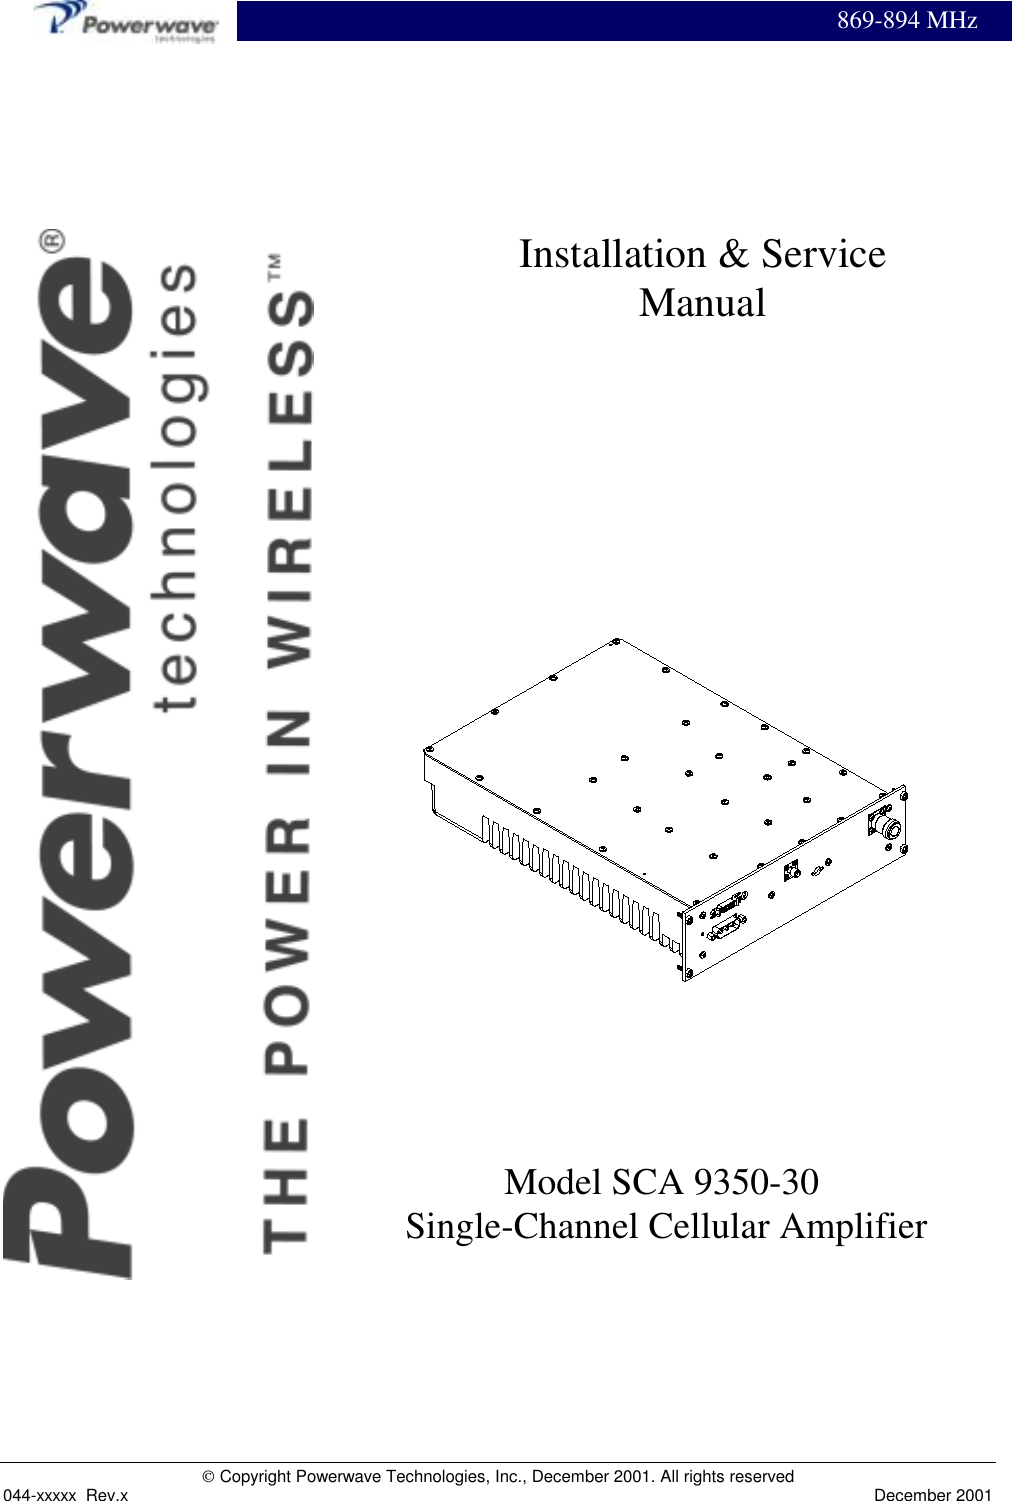 869-894 MHz Copyright Powerwave Technologies, Inc., December 2001. All rights reserved044-xxxxx  Rev.x December 2001Model SCA 9350-30  Single-Channel Cellular AmplifierInstallation &amp; ServiceManual